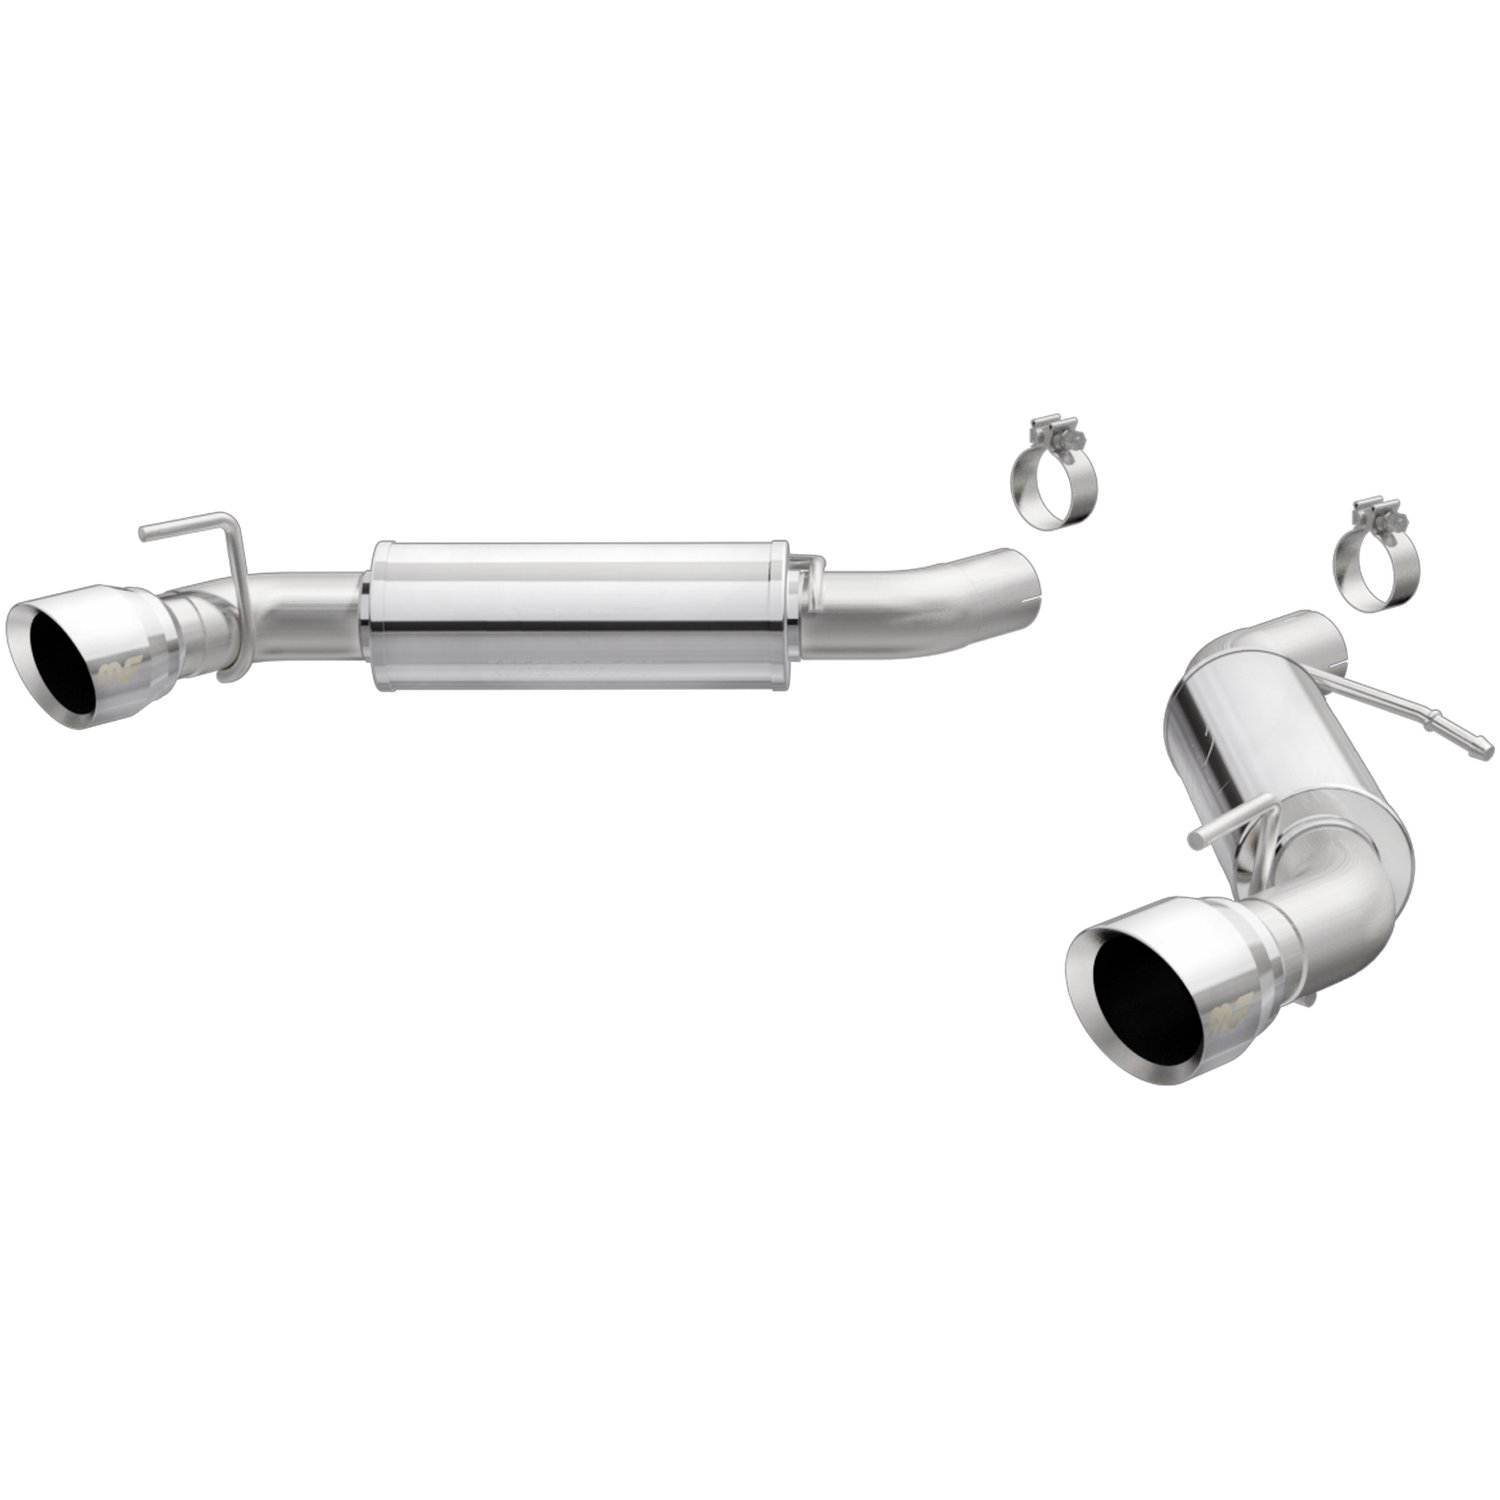 Axle-Back Exhaust System 2016-2018 Camaro V8 6.2L